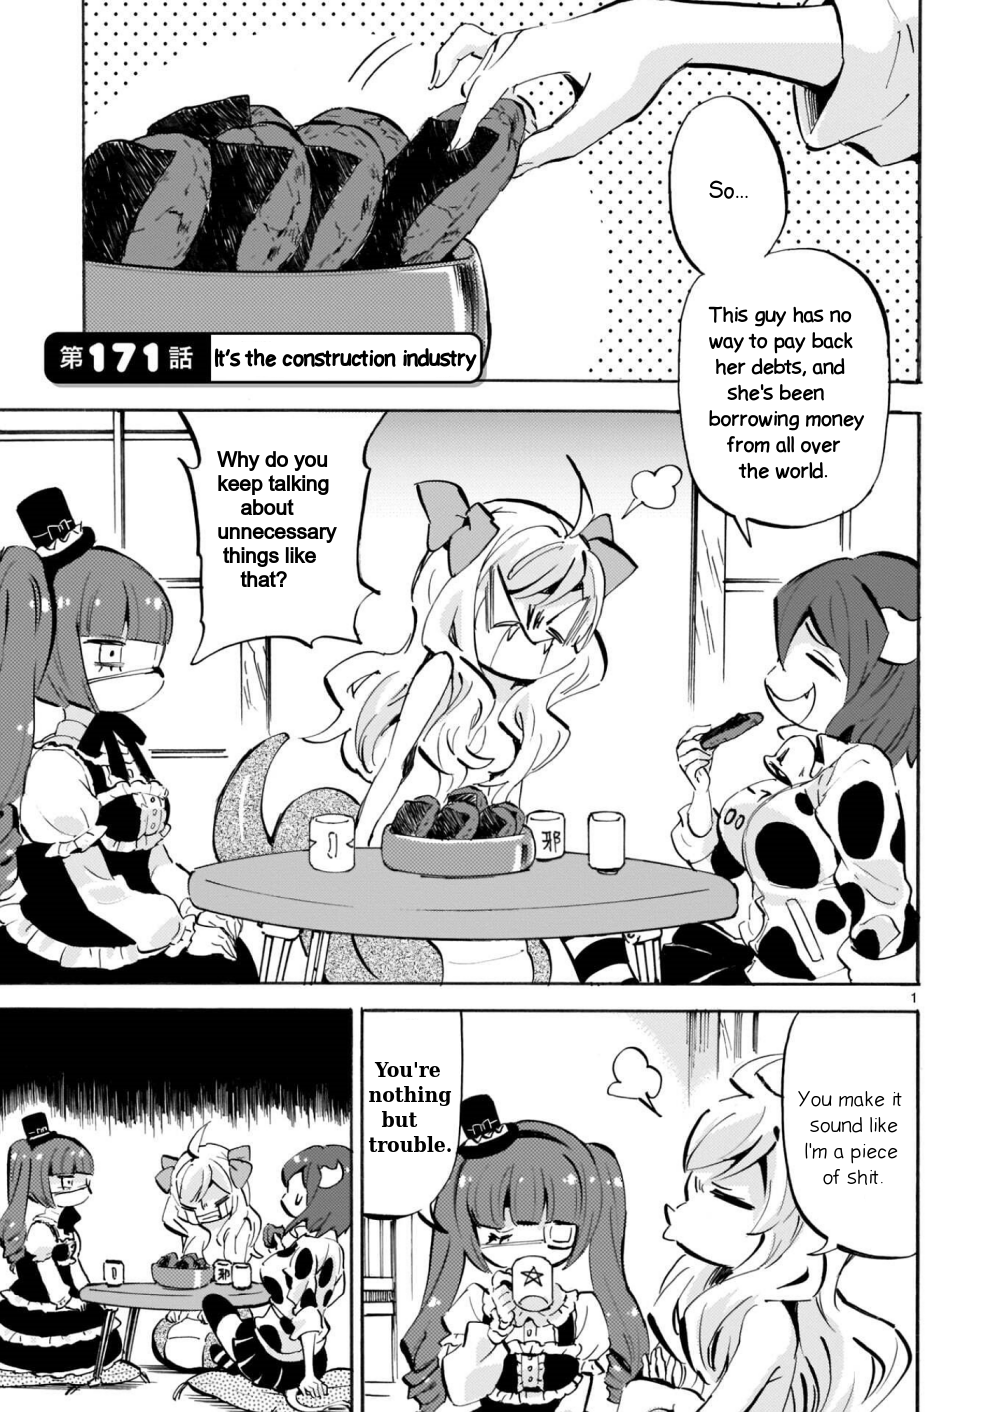 Jashin-Chan Dropkick Vol.15 Chapter 171: It's The Construction Industry - Picture 1